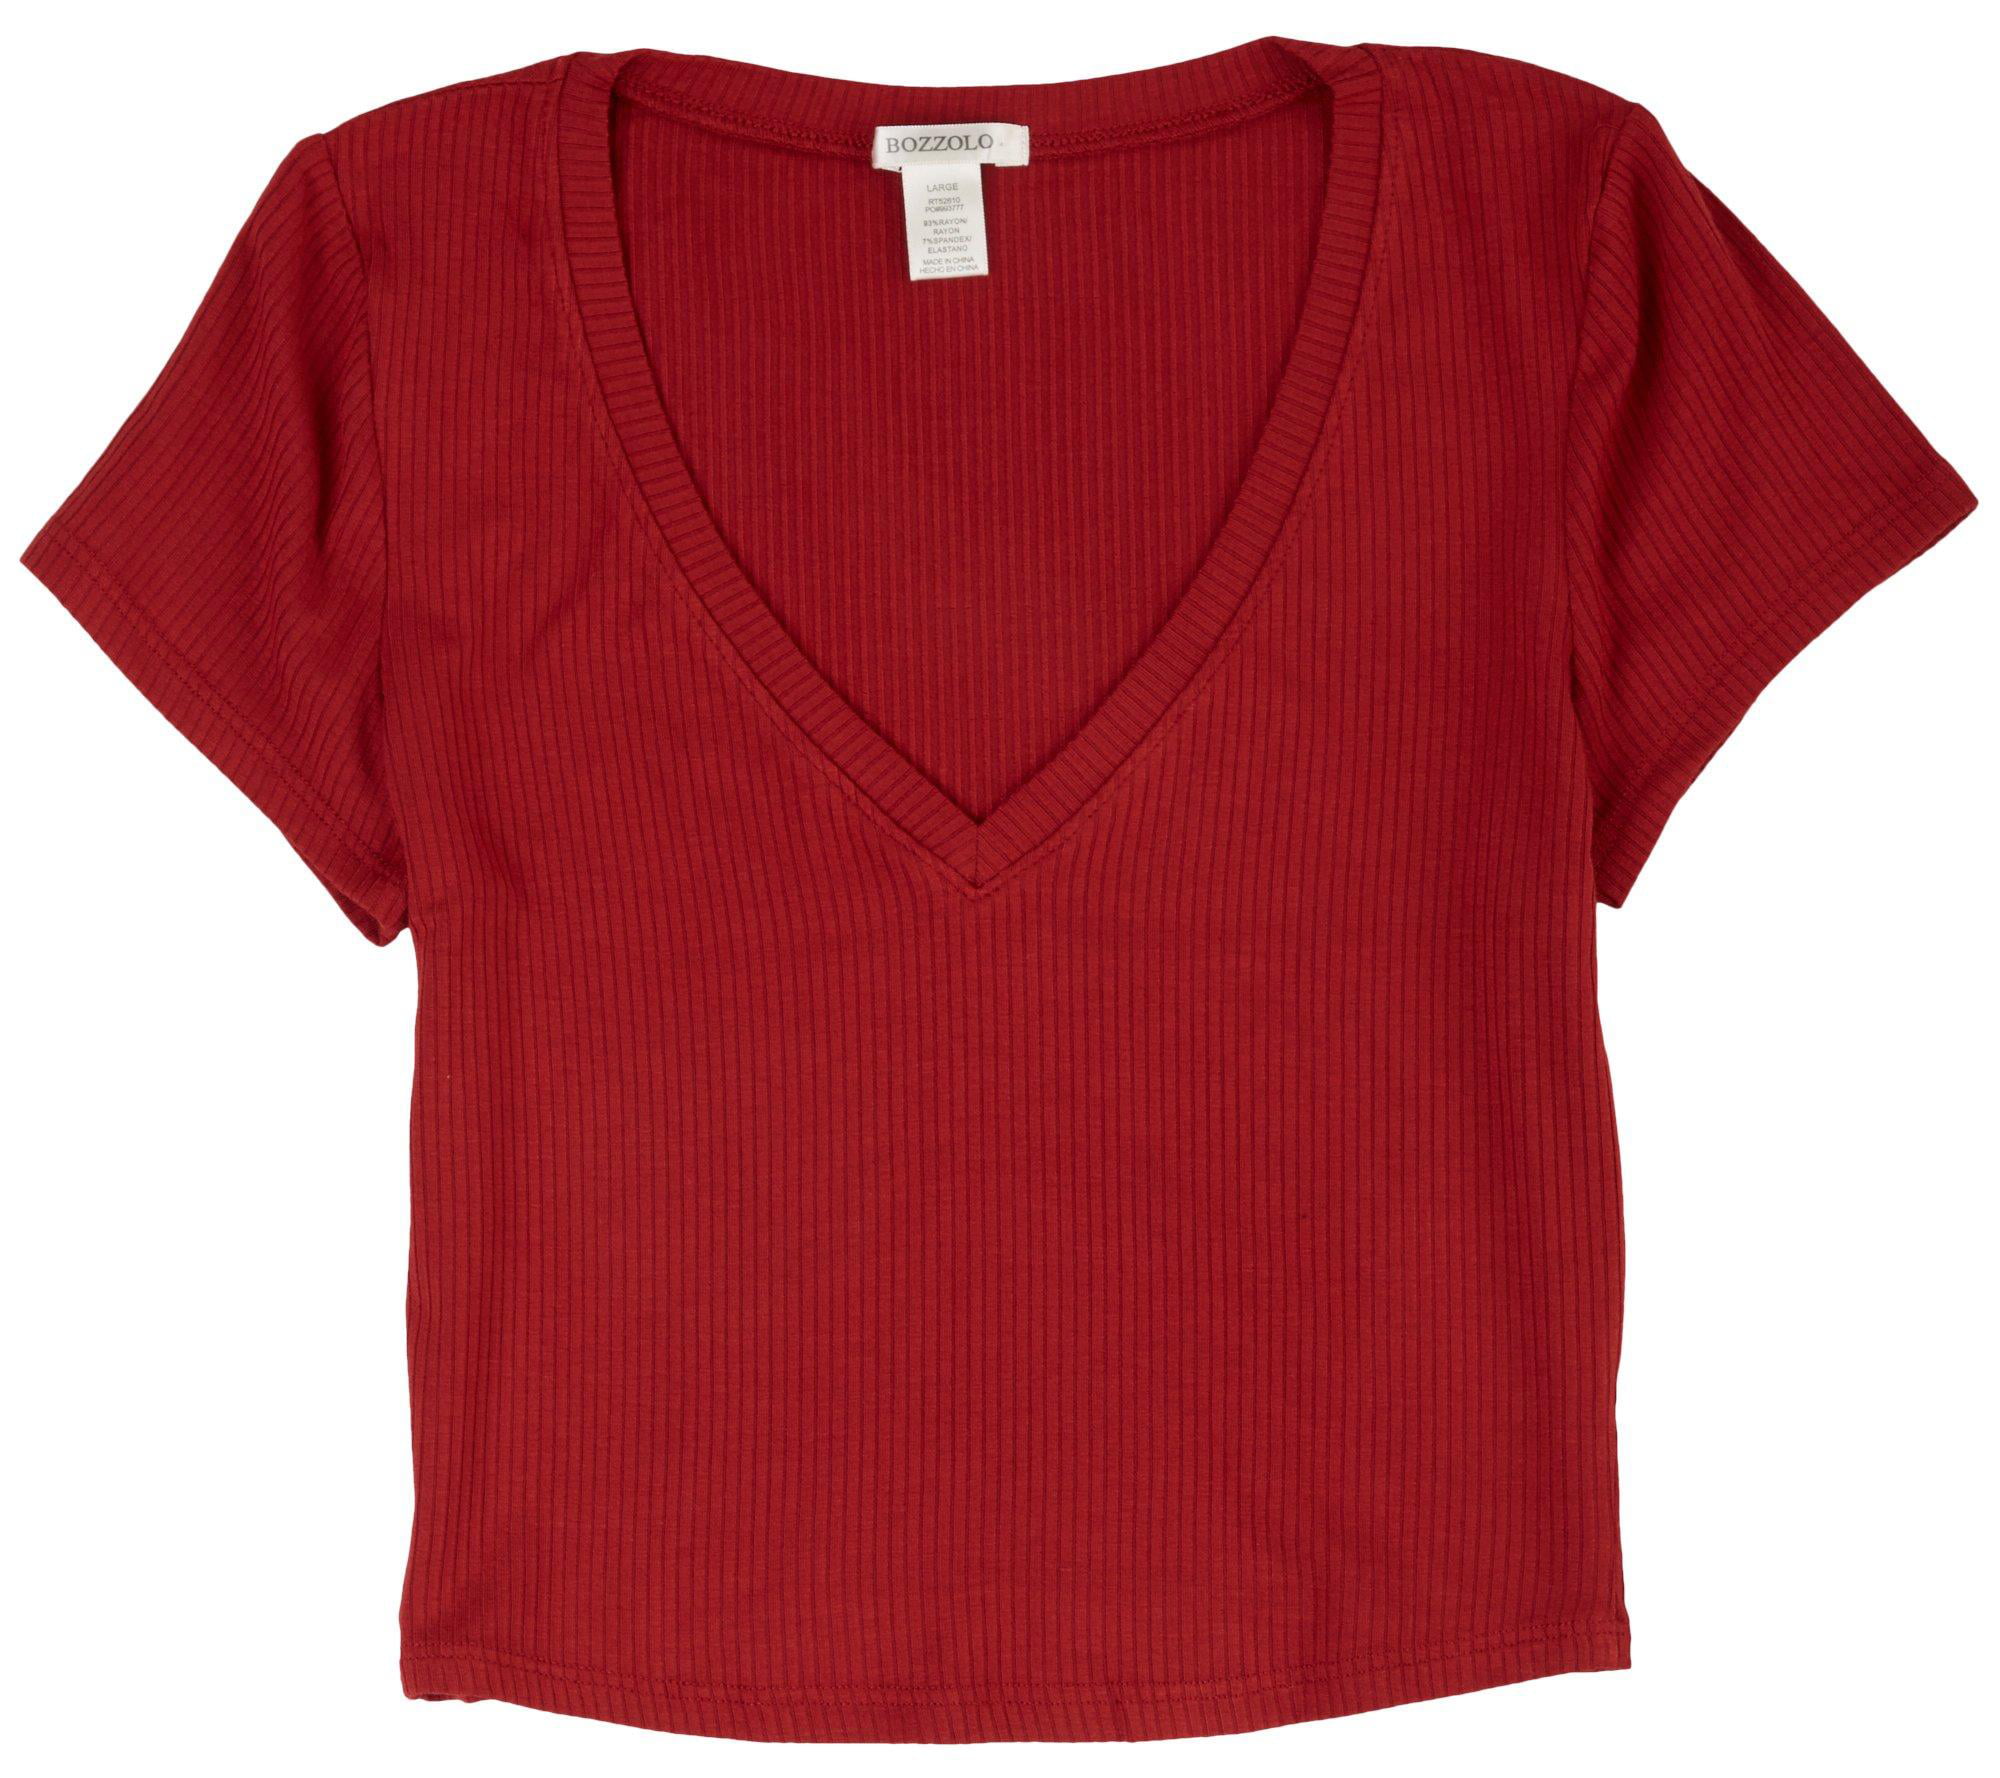 Details about   Bozzolo Juniors Dark Red 3/4 Length Sleeve Crop Top Casual 